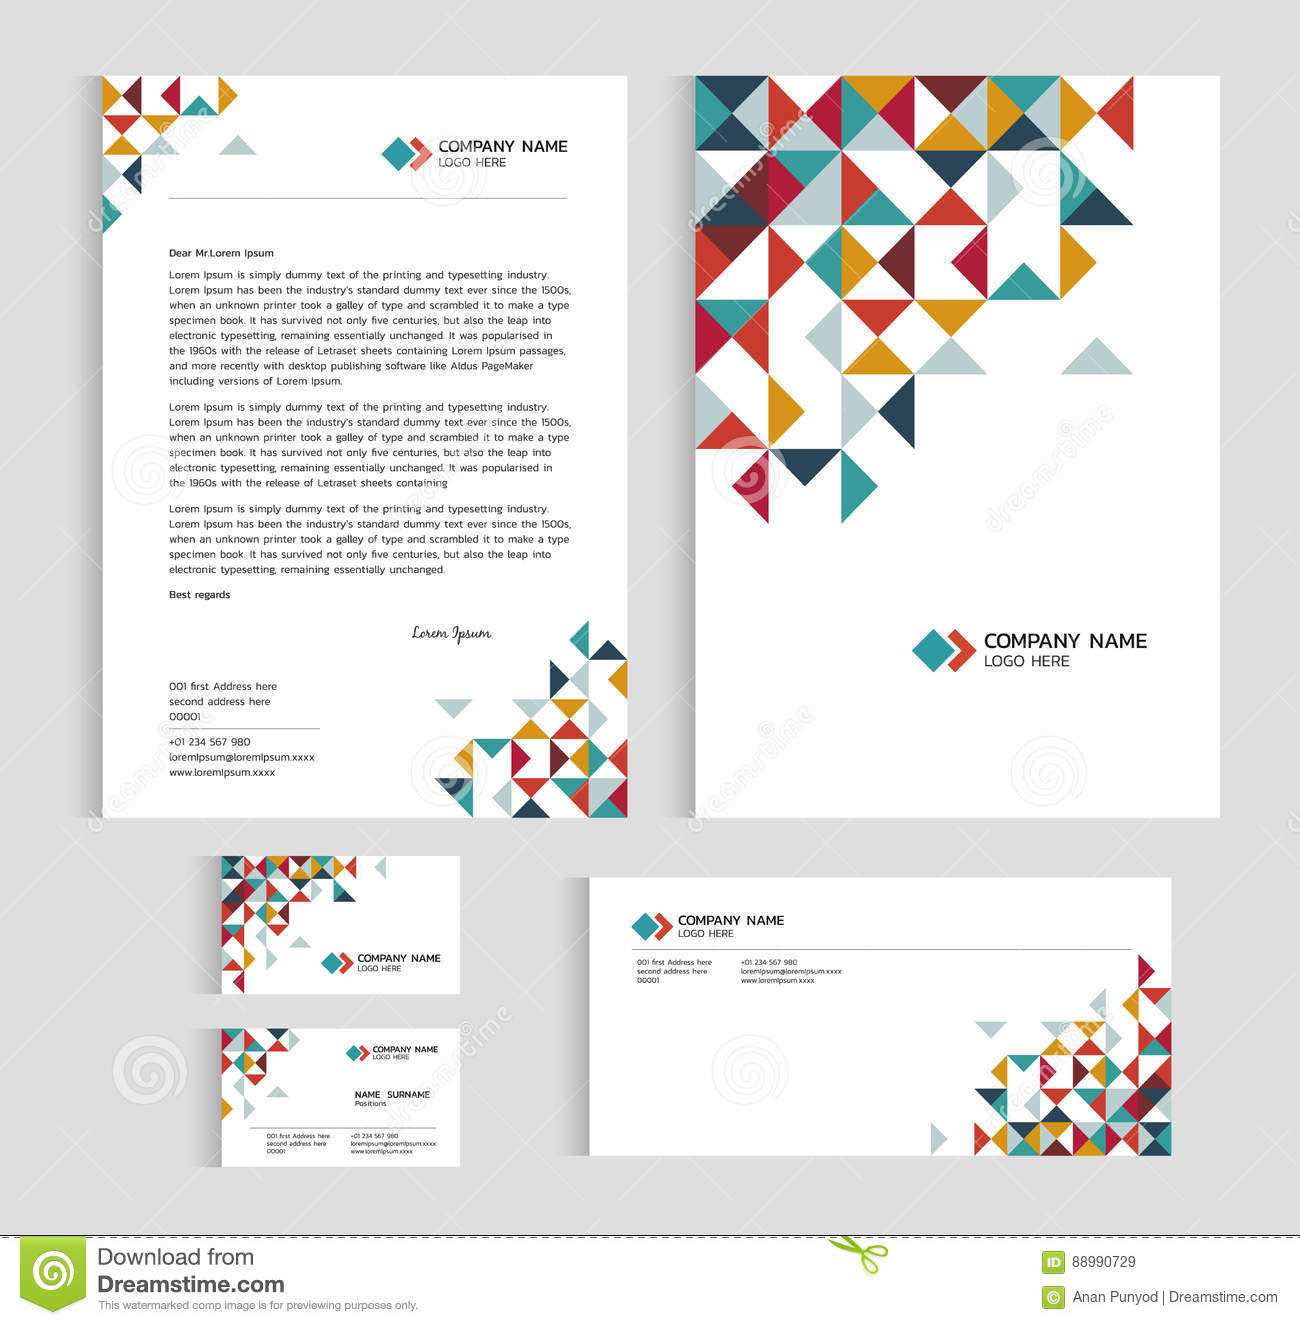 39 Creative Business Card Template Letter Size For Free with Business Card Template Letter Size